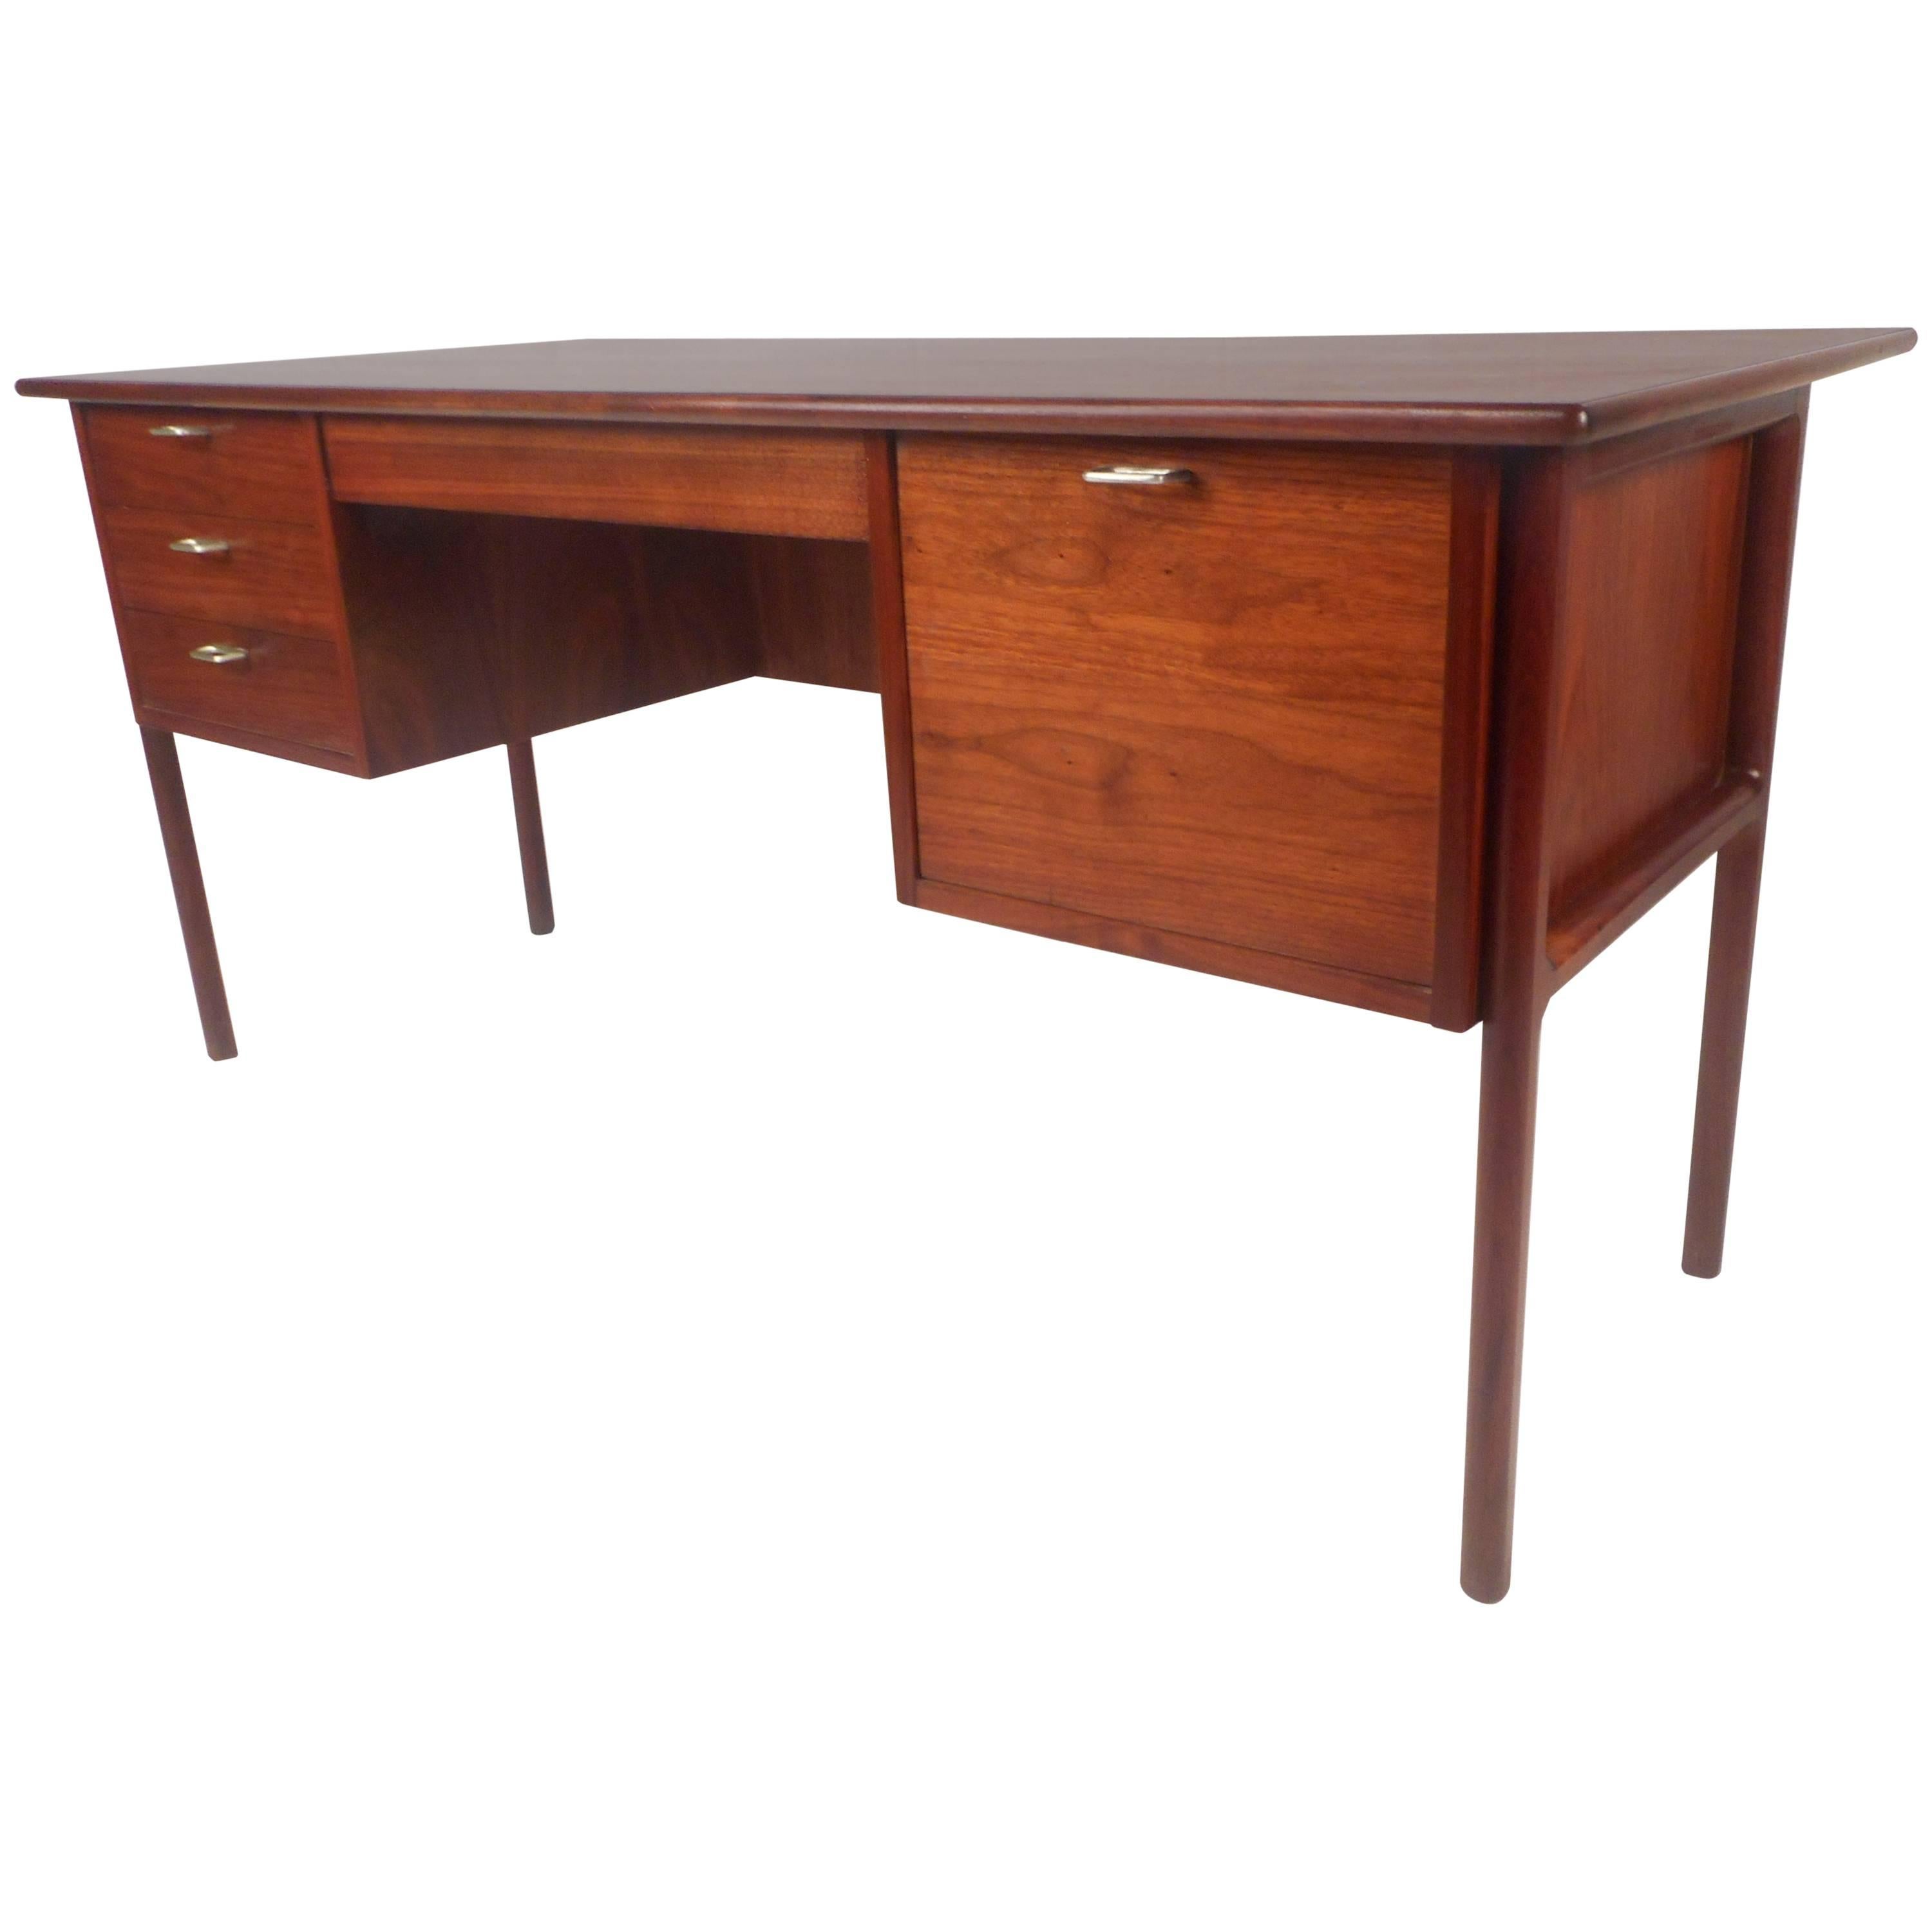 Large Mid-Century Modern Walnut Desk with a Finished Back